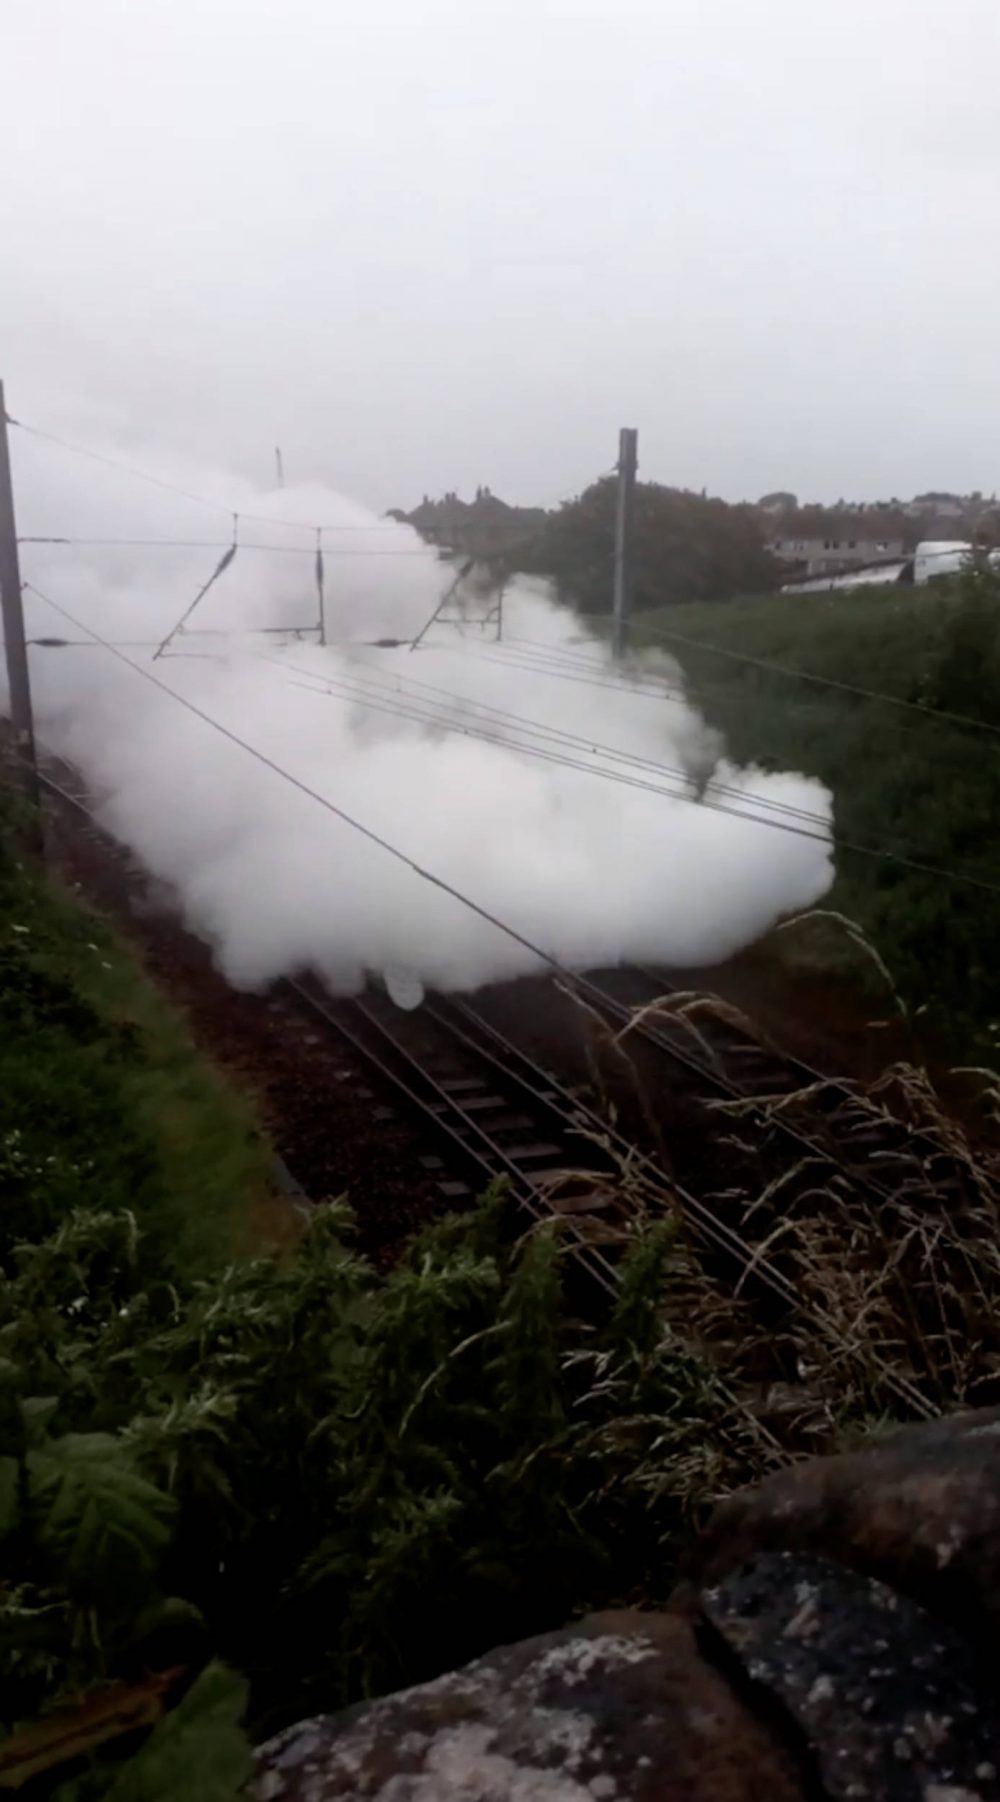 The Flying Scotsman covered in steam | Transport News UK